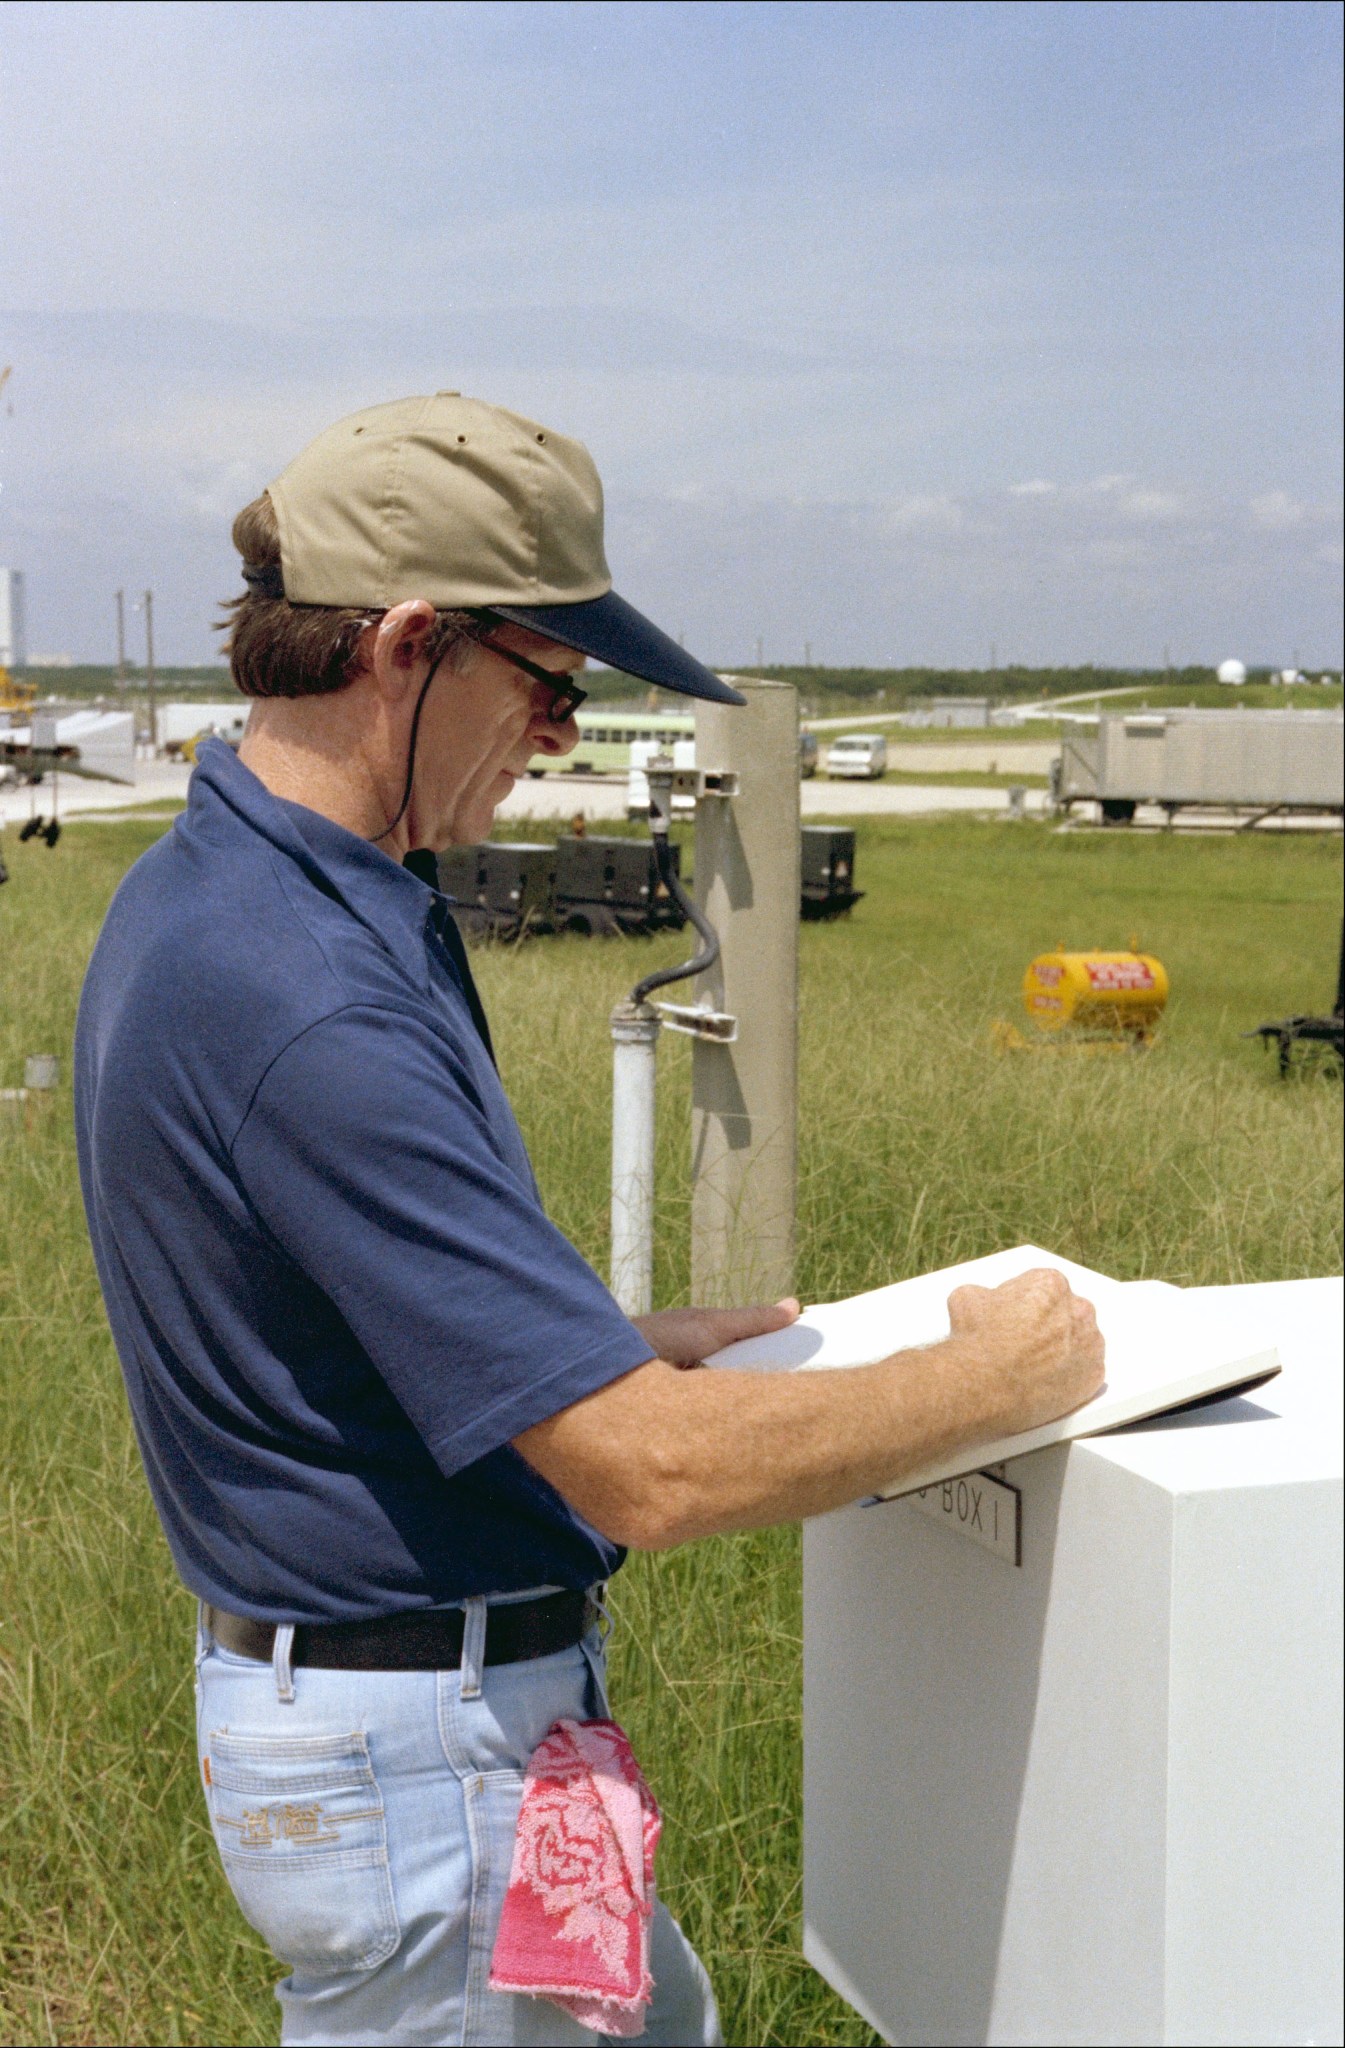 James Dean stands in the grass at the launchpad at NASA's Kennedy Space Center and draws on a sketchpad while using a white box as a makeshift easel. He is wearing a dark blue polo shirt, blue jeans, sunglasses, and a beige baseball cap with a dark rim. A red patterned fabric is sticking out of his right-hand pocket of his jeans.